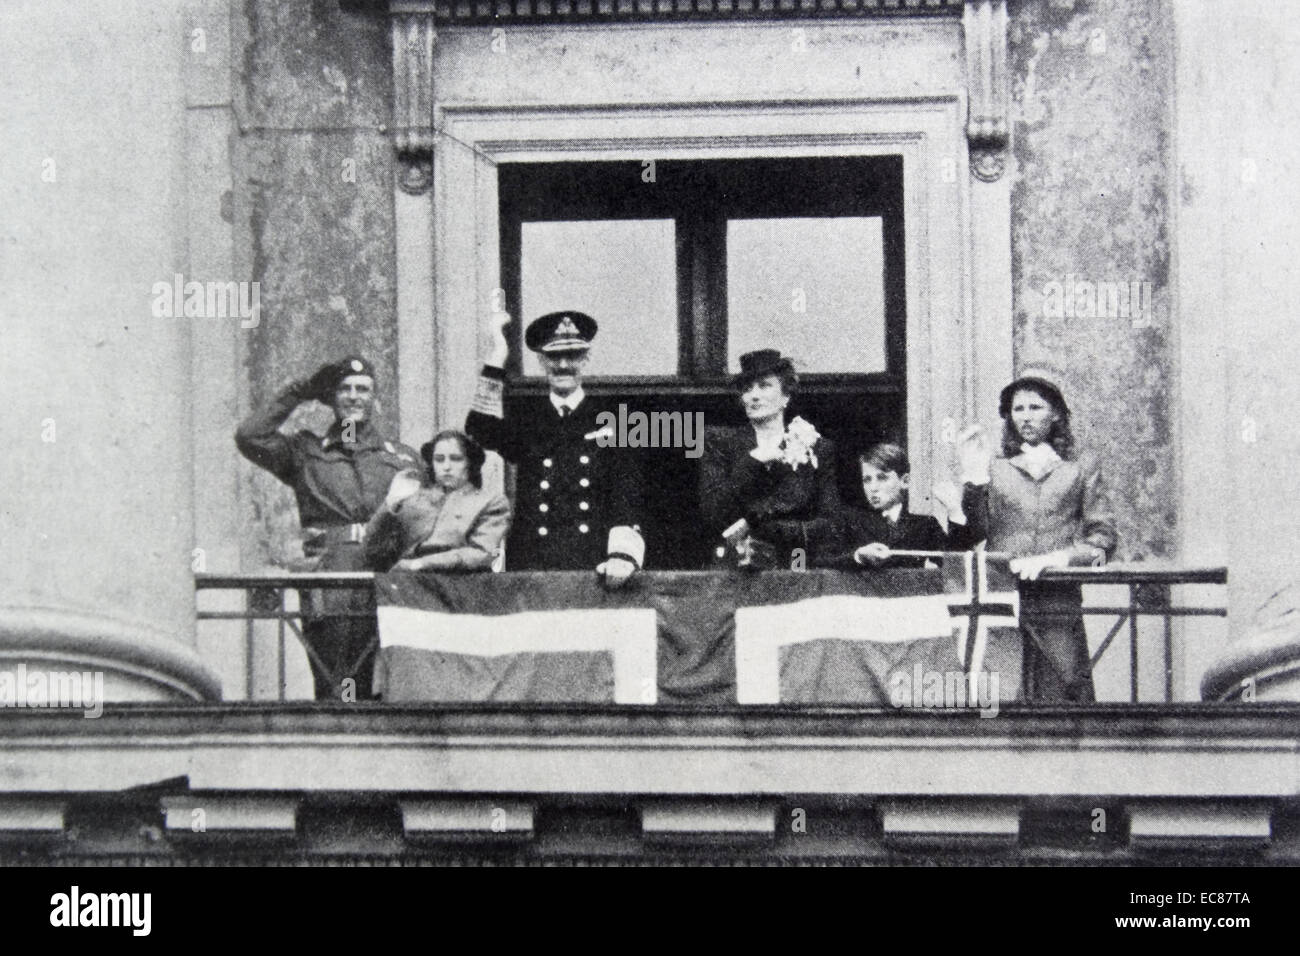 Photograph of the Norwegian Royal Family including King Haakon Crown, Crown Prince Olav and Prince Harald waving from the balcony of Oslo's Palace. Dated 1945 Stock Photo